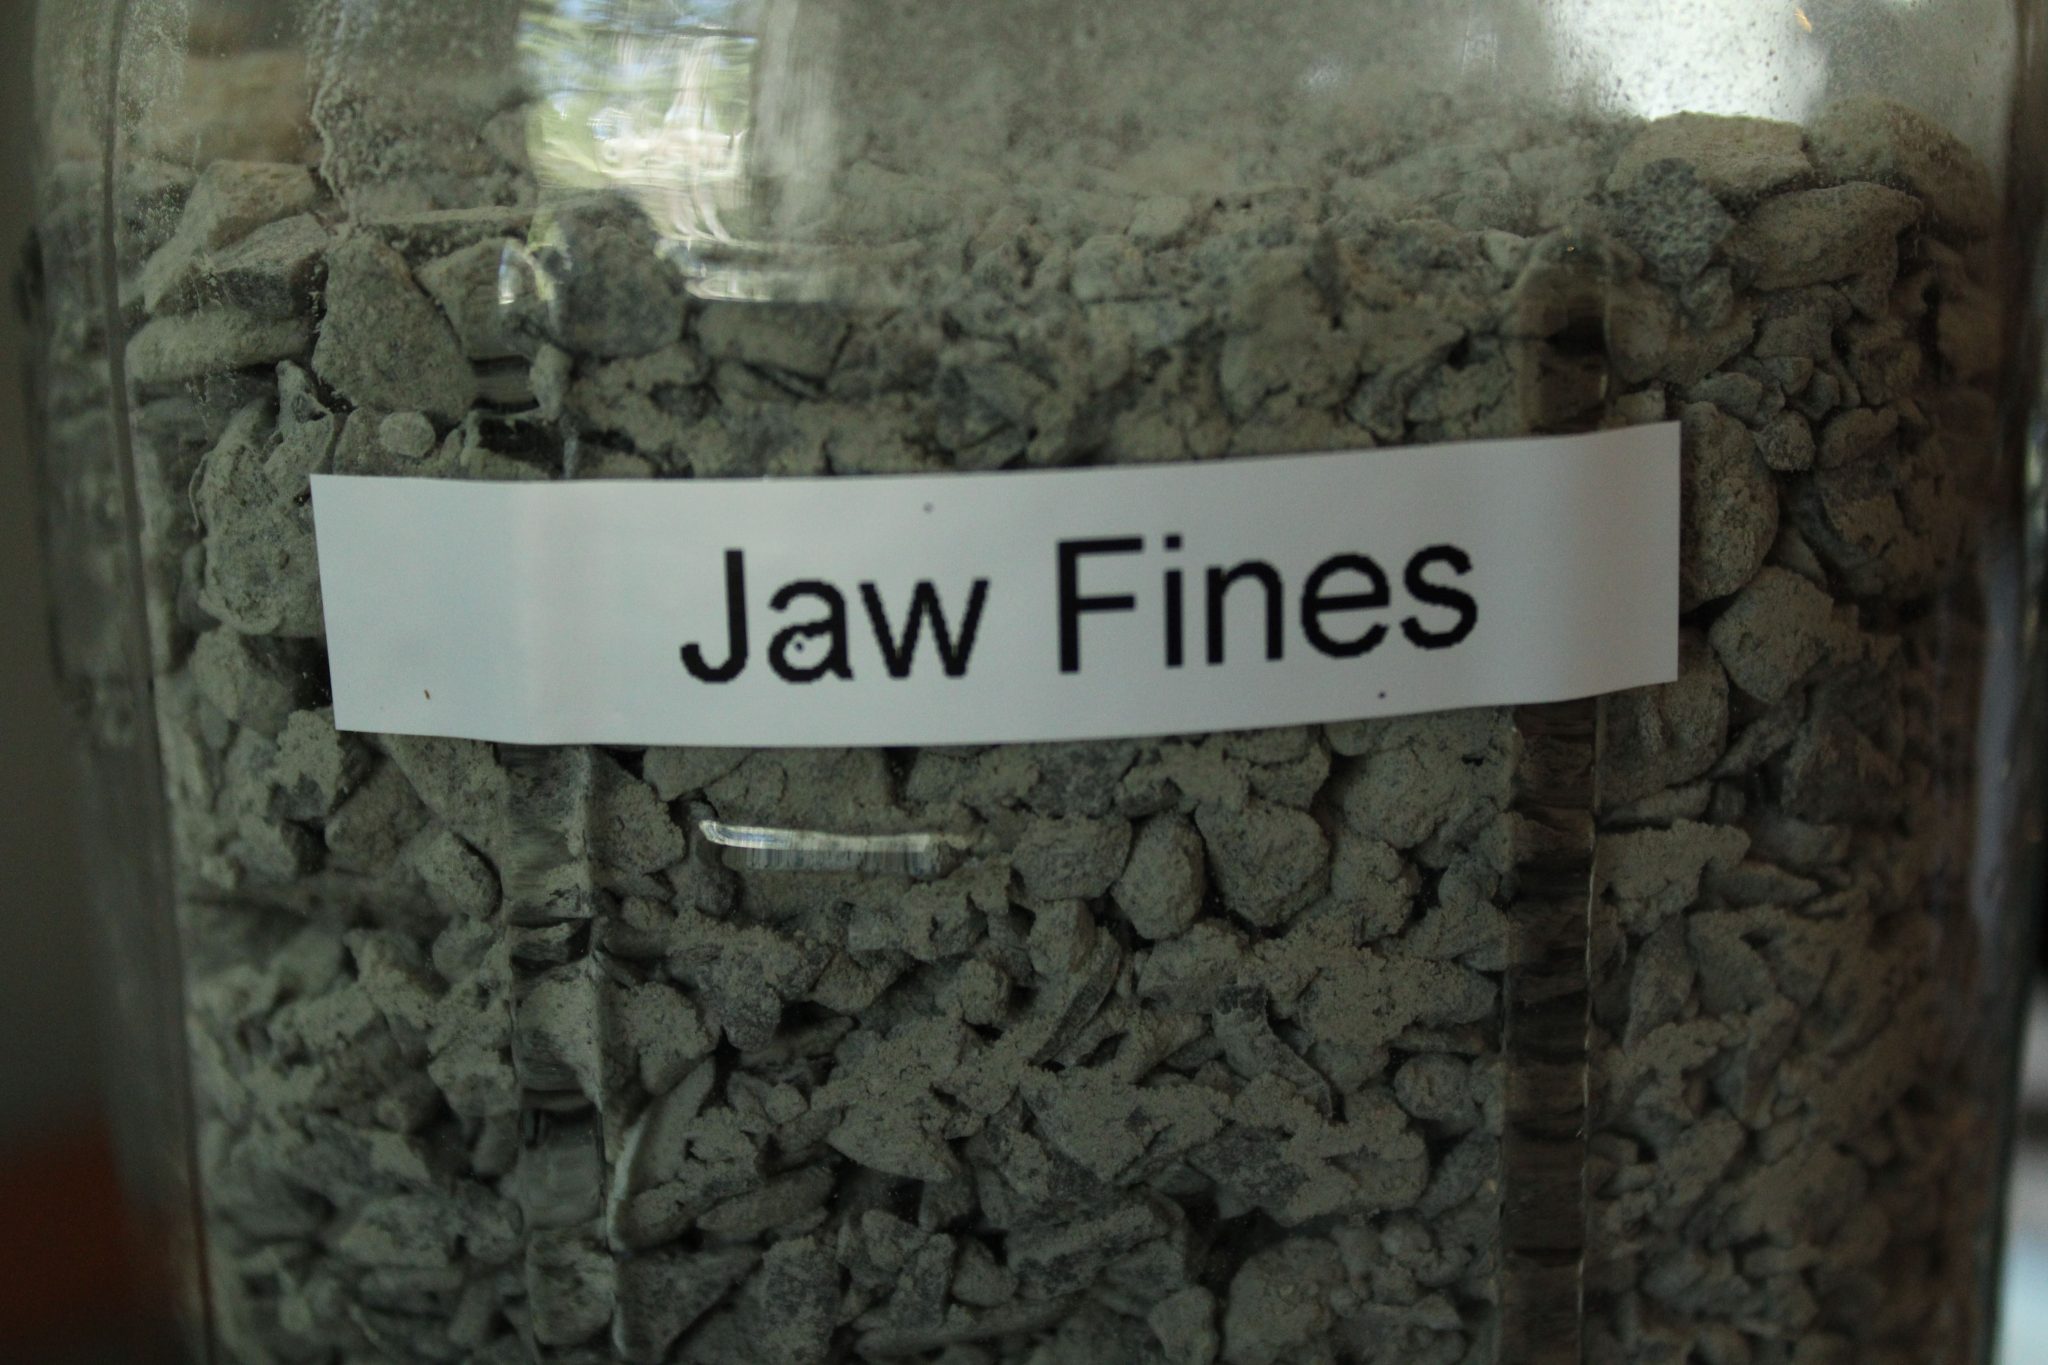 Jaw Fines